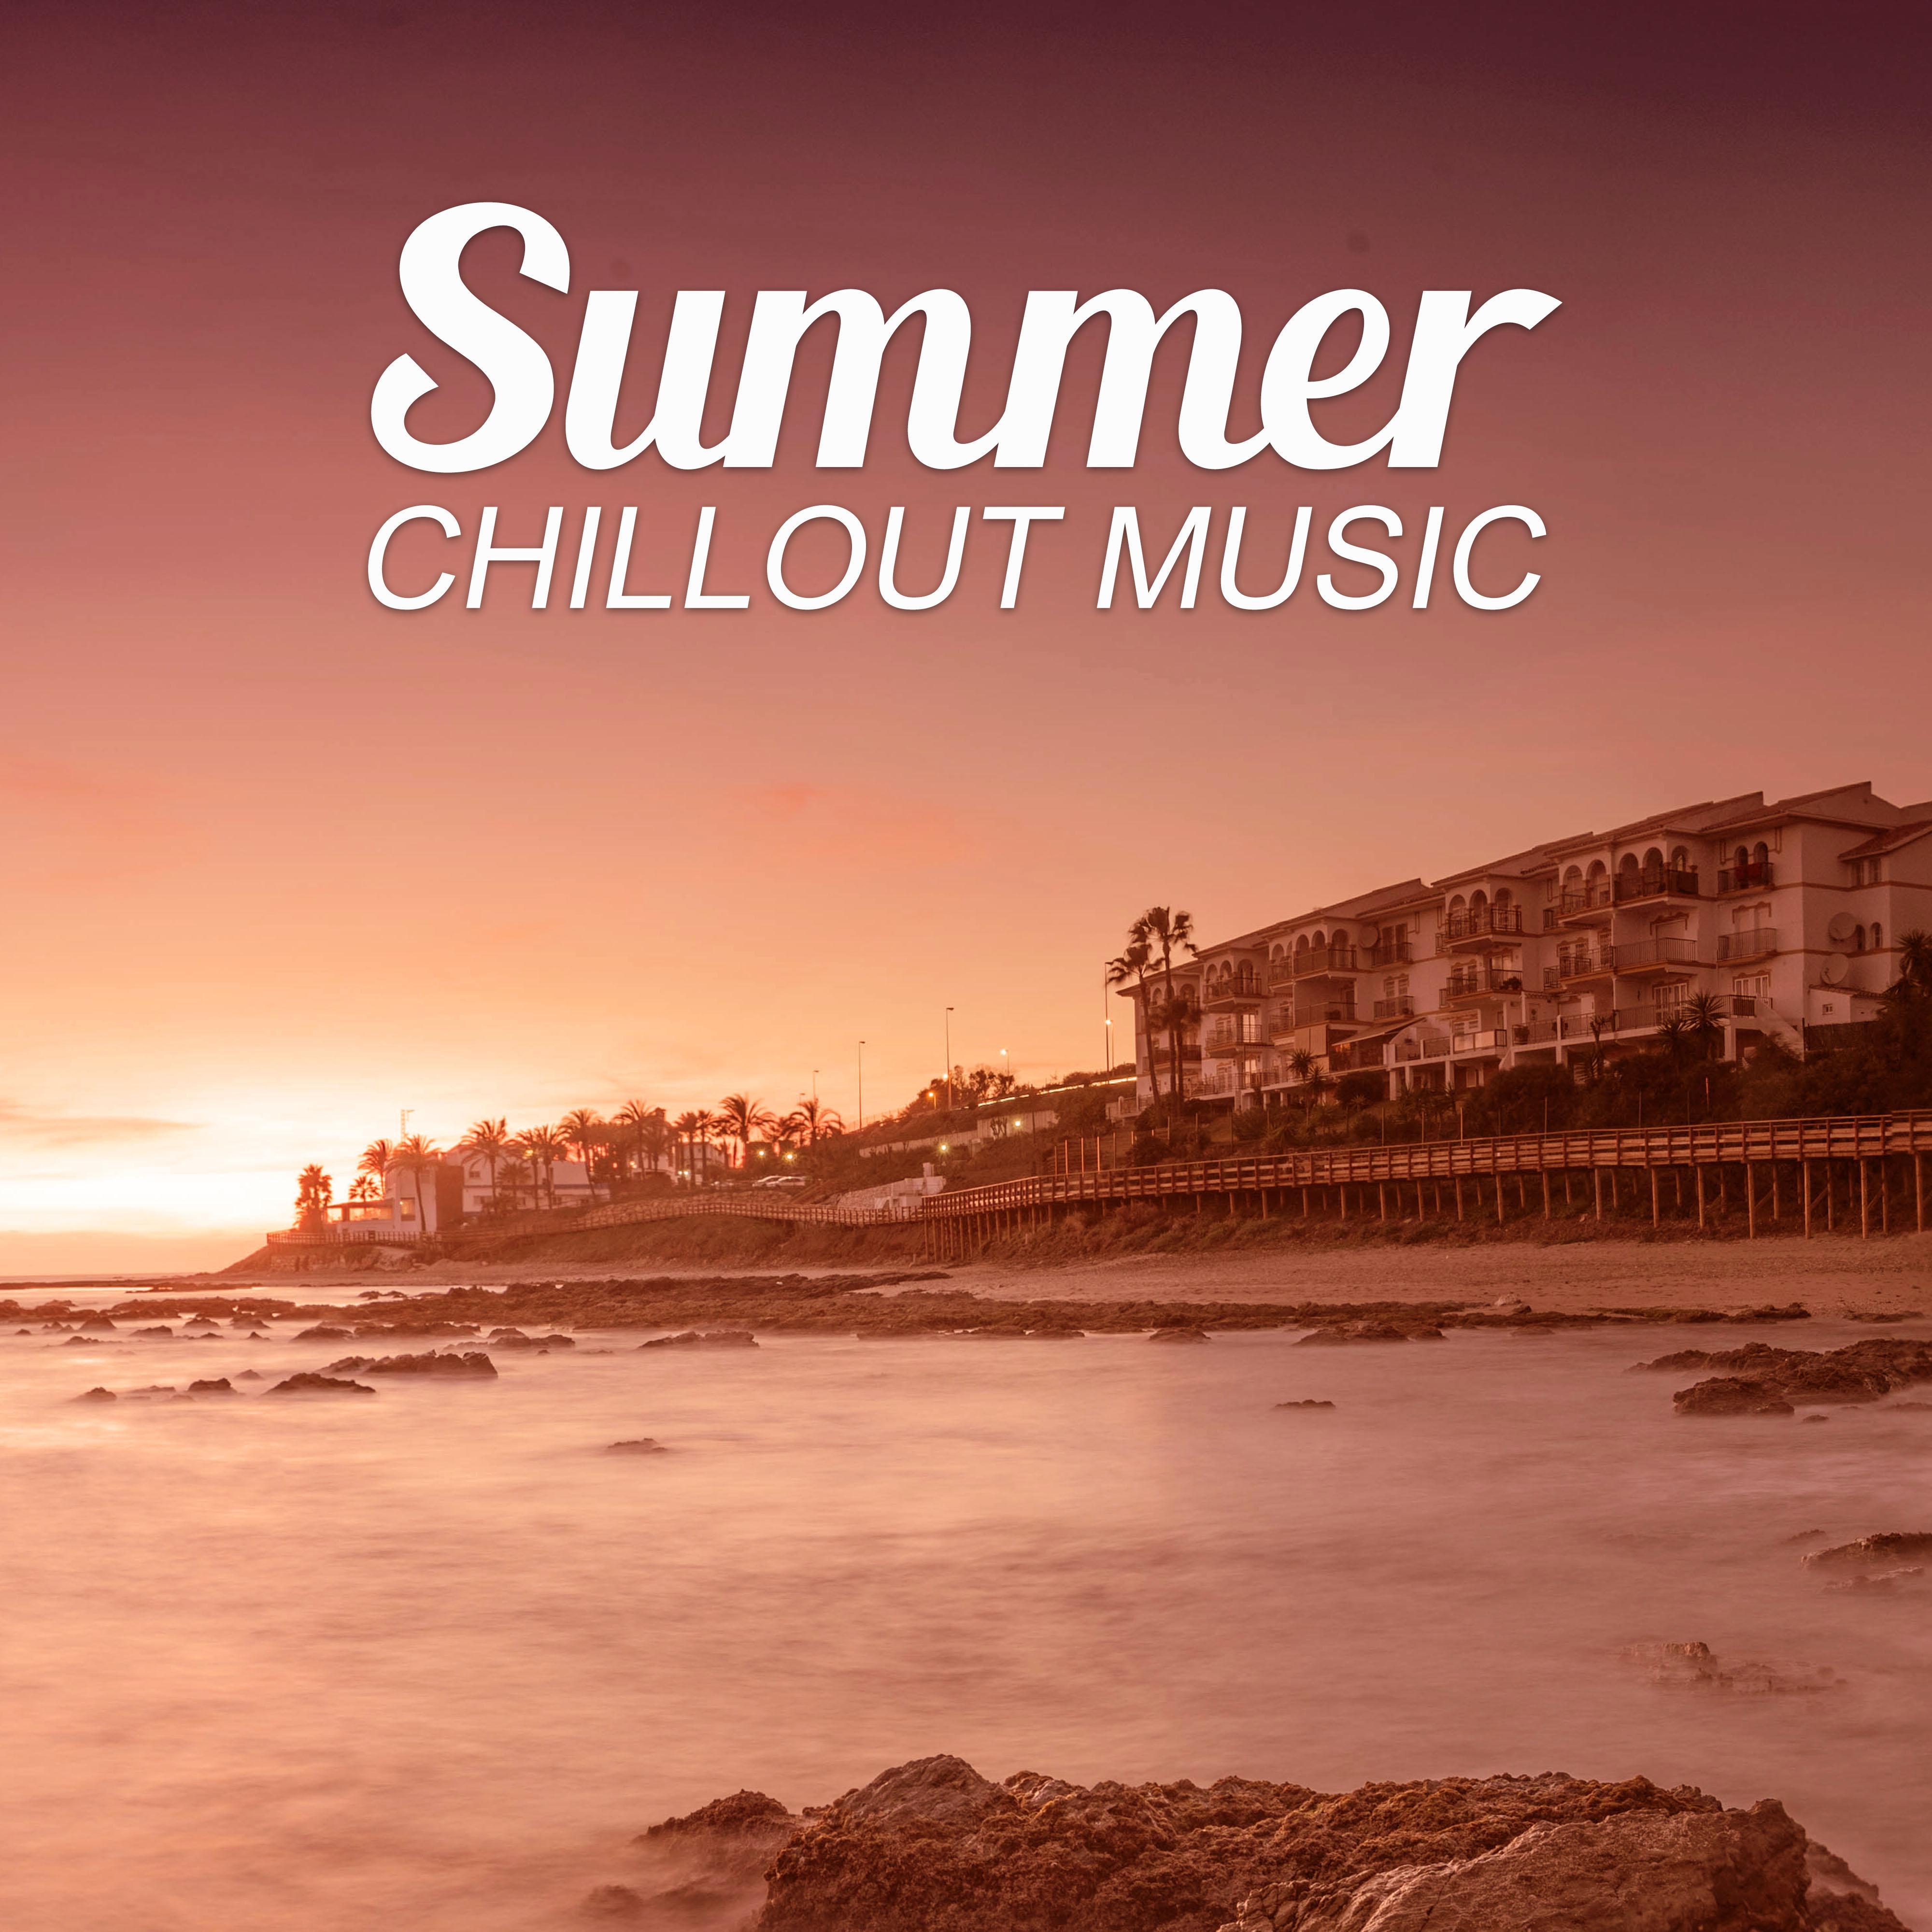 Summer Chillout Music – Best Summer Music, Hot Sun, Drinks & Cocktails, Deep Relaxation, Ambient Music